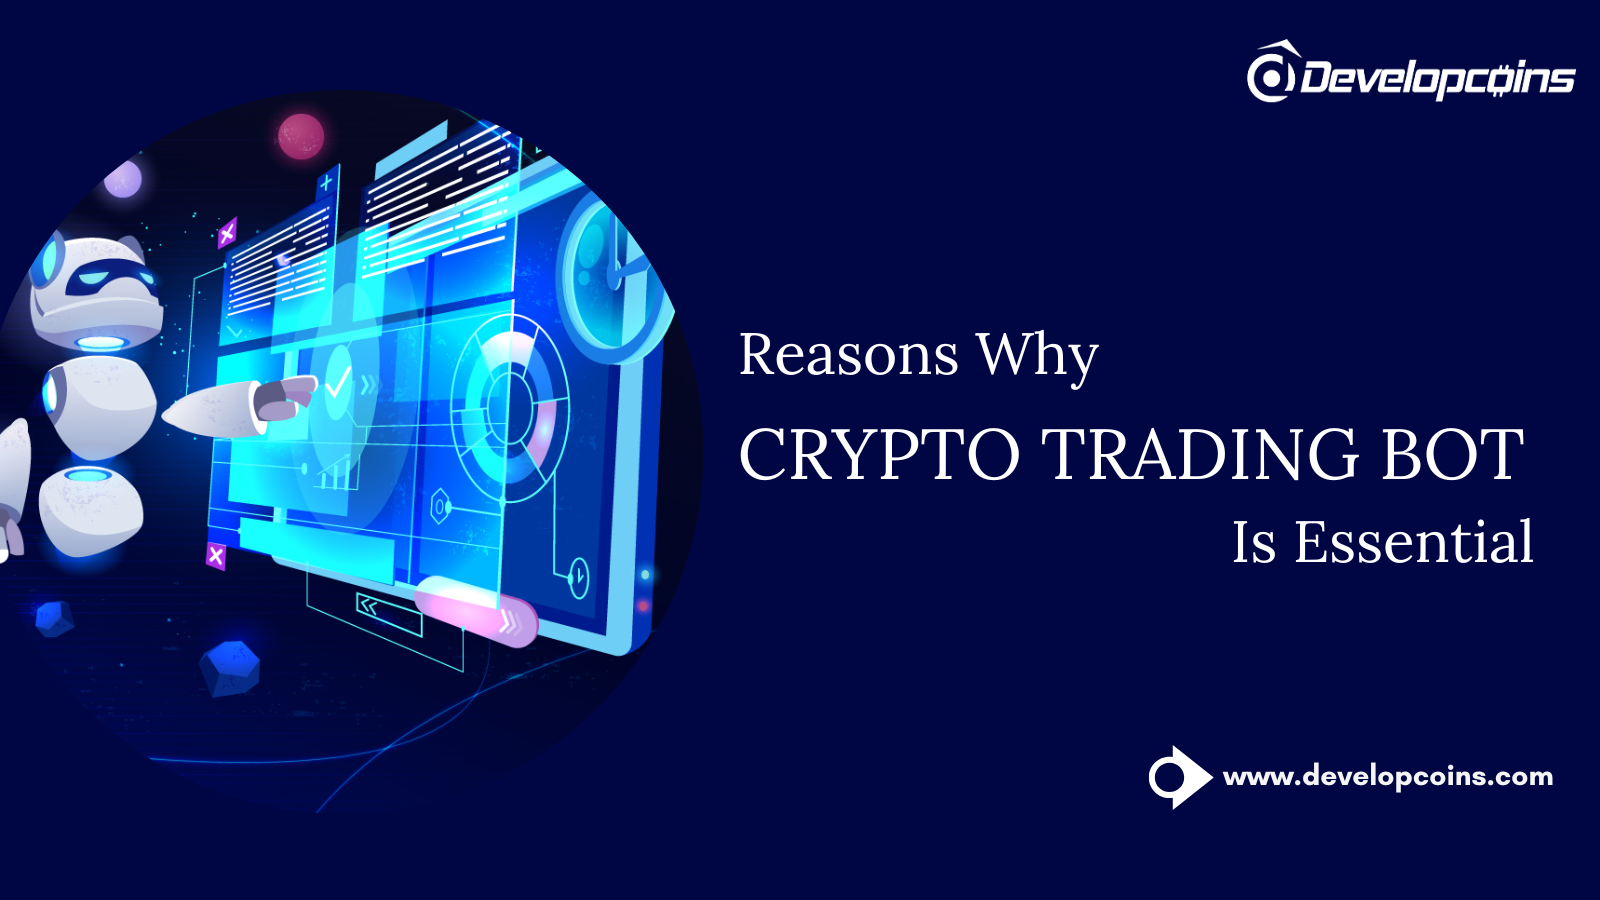 Reasons Why Crypto Trading Bots Are Essential In Trading Platforms